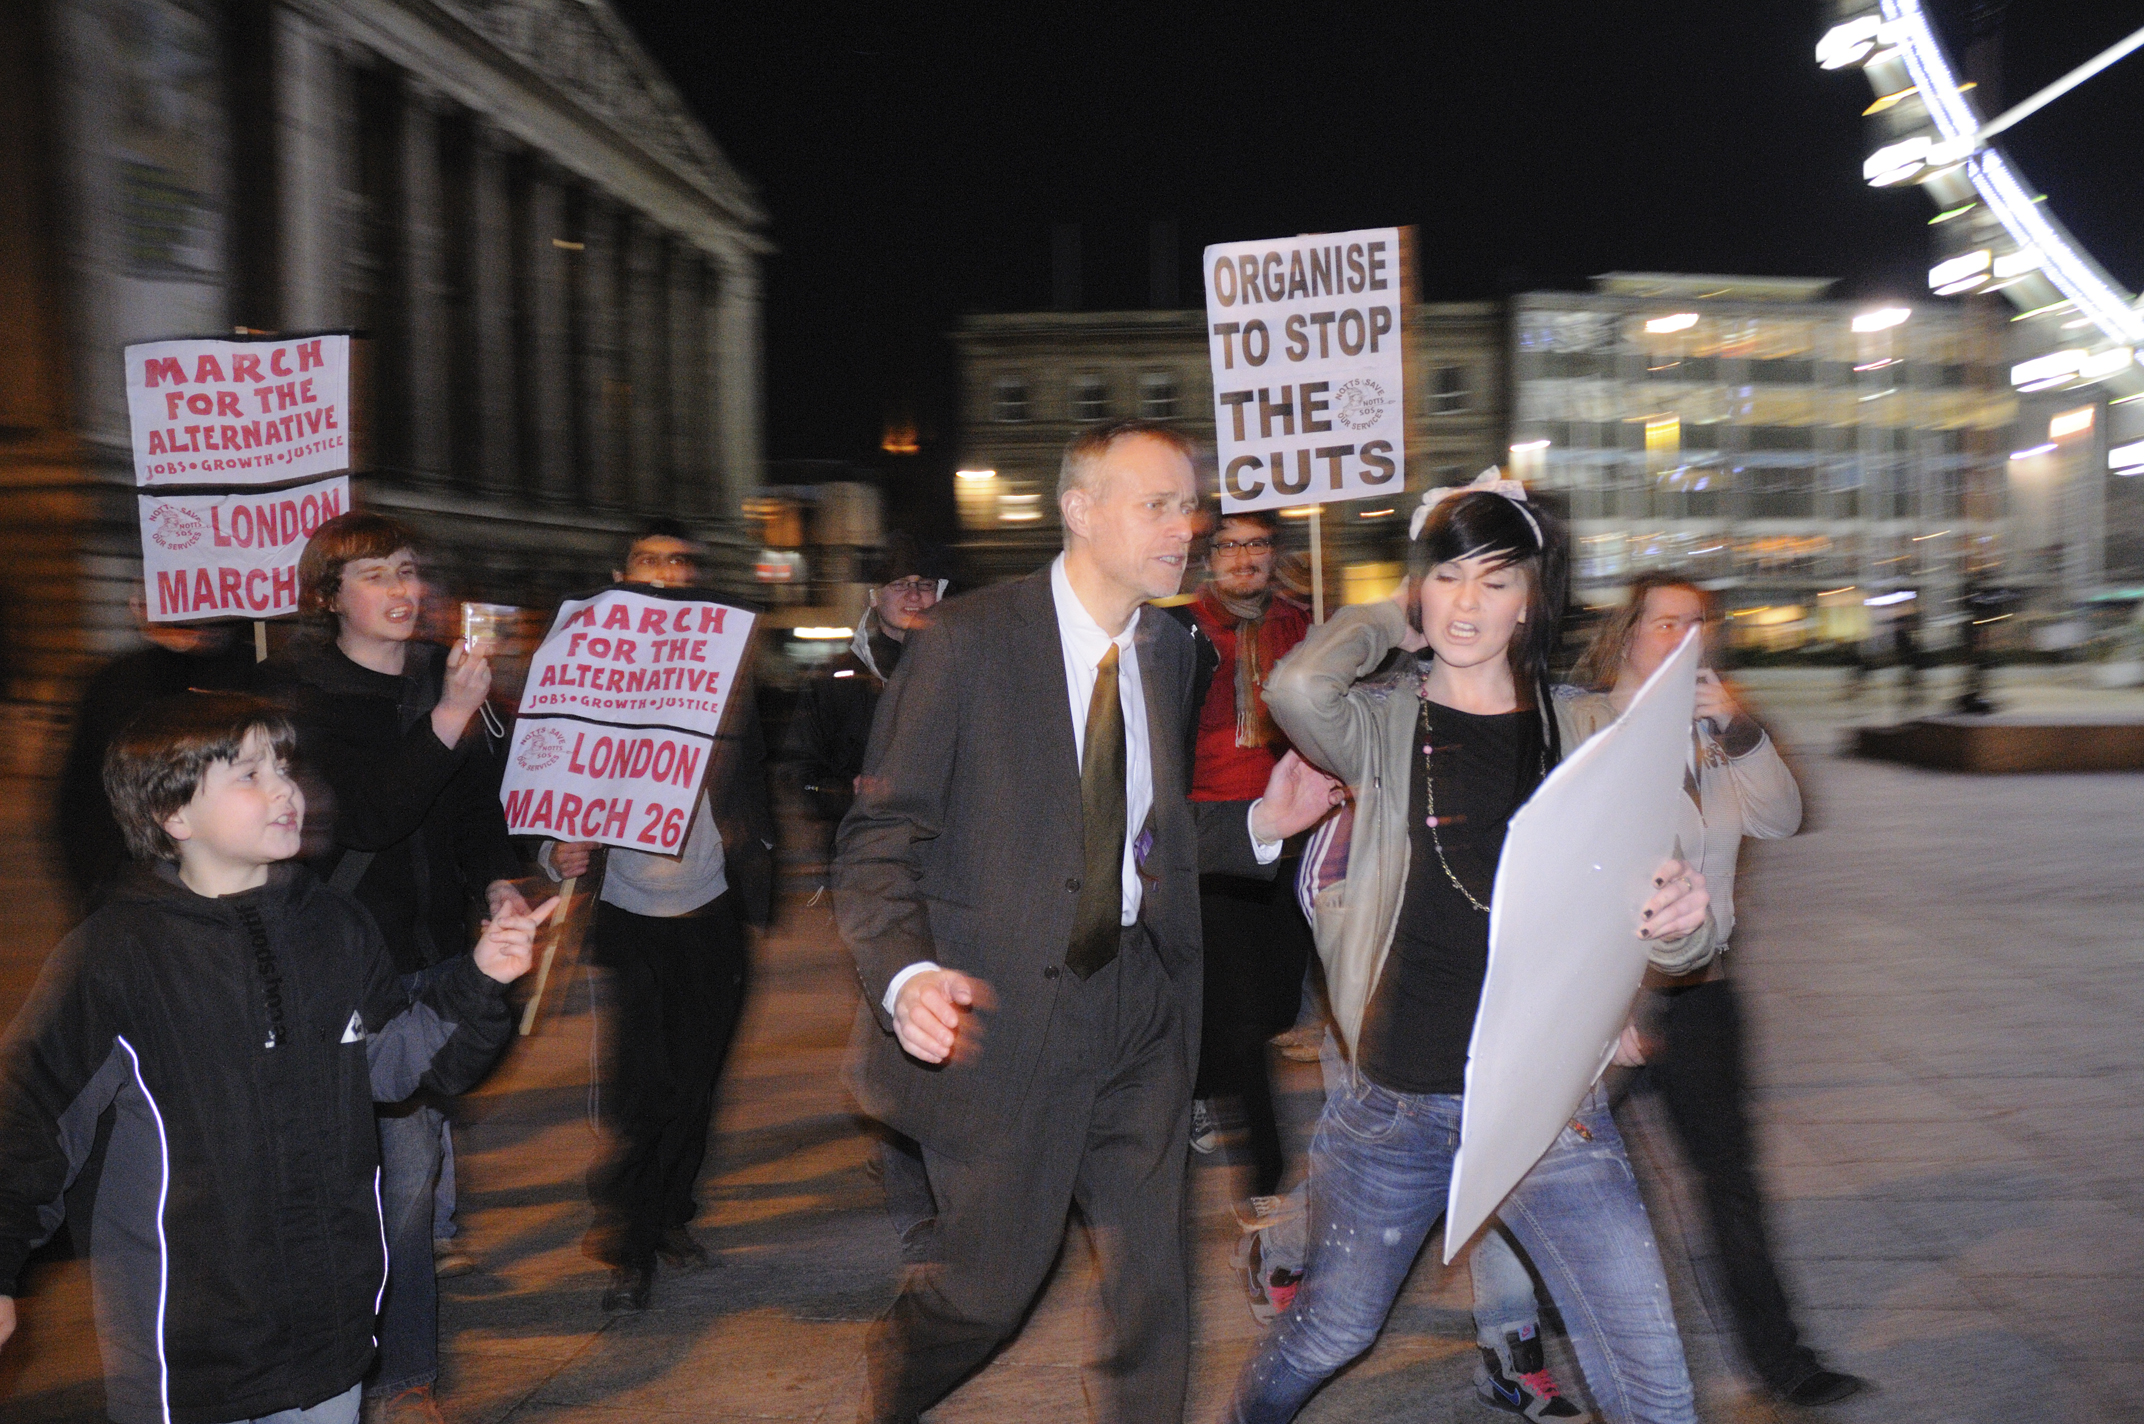 Jon Collins harangued during evening protest